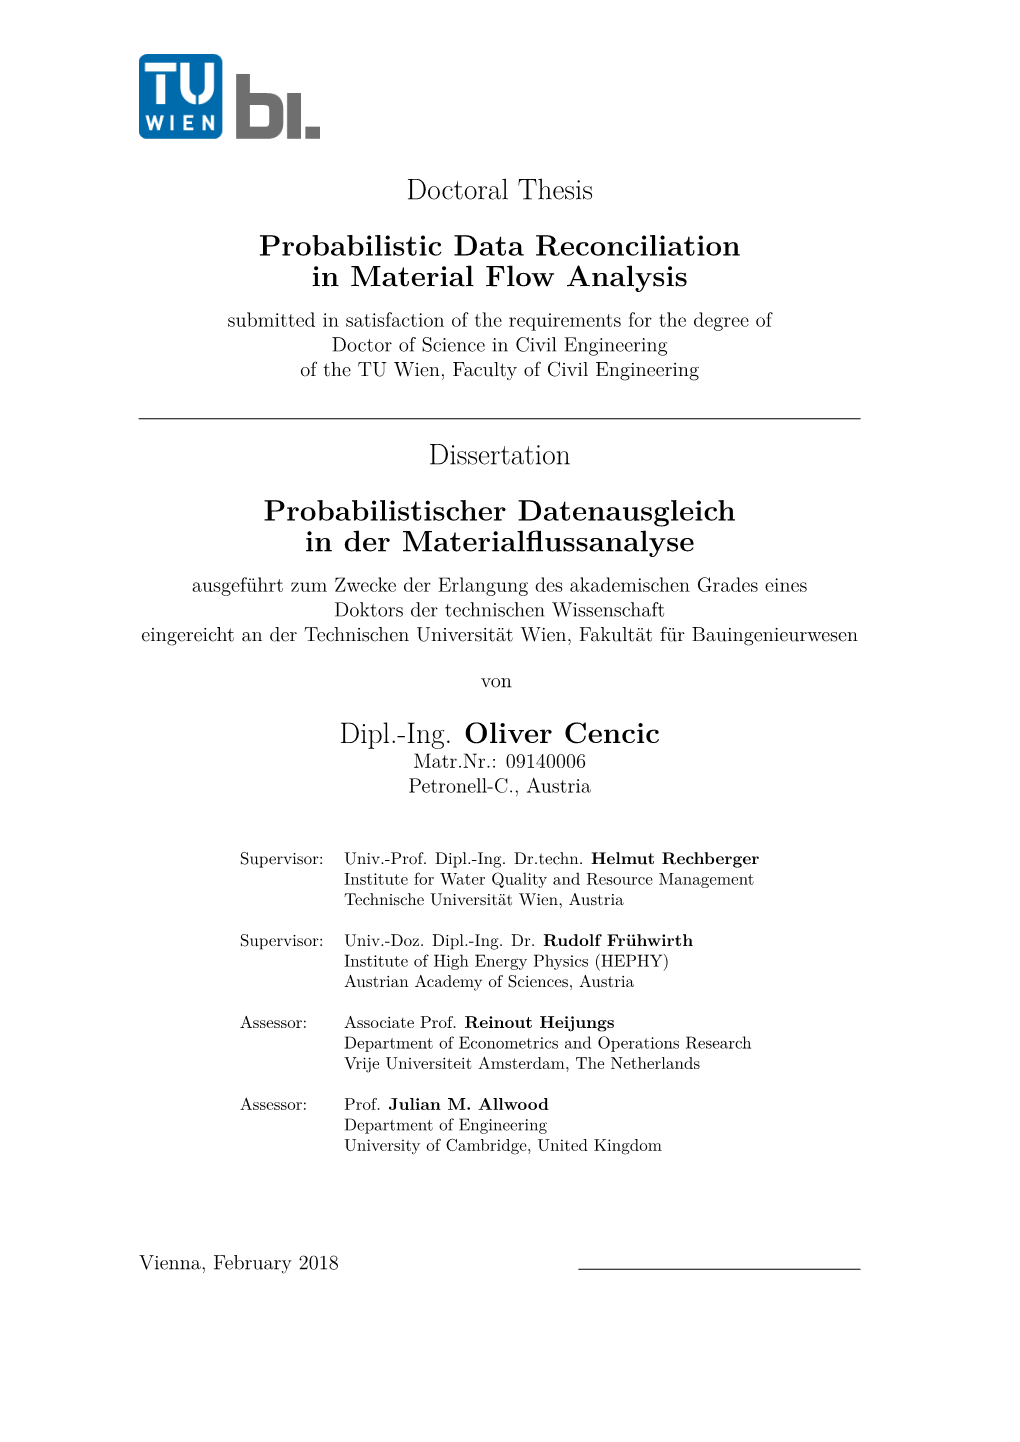 Doctoral Thesis Probabilistic Data Reconciliation in Material Flow